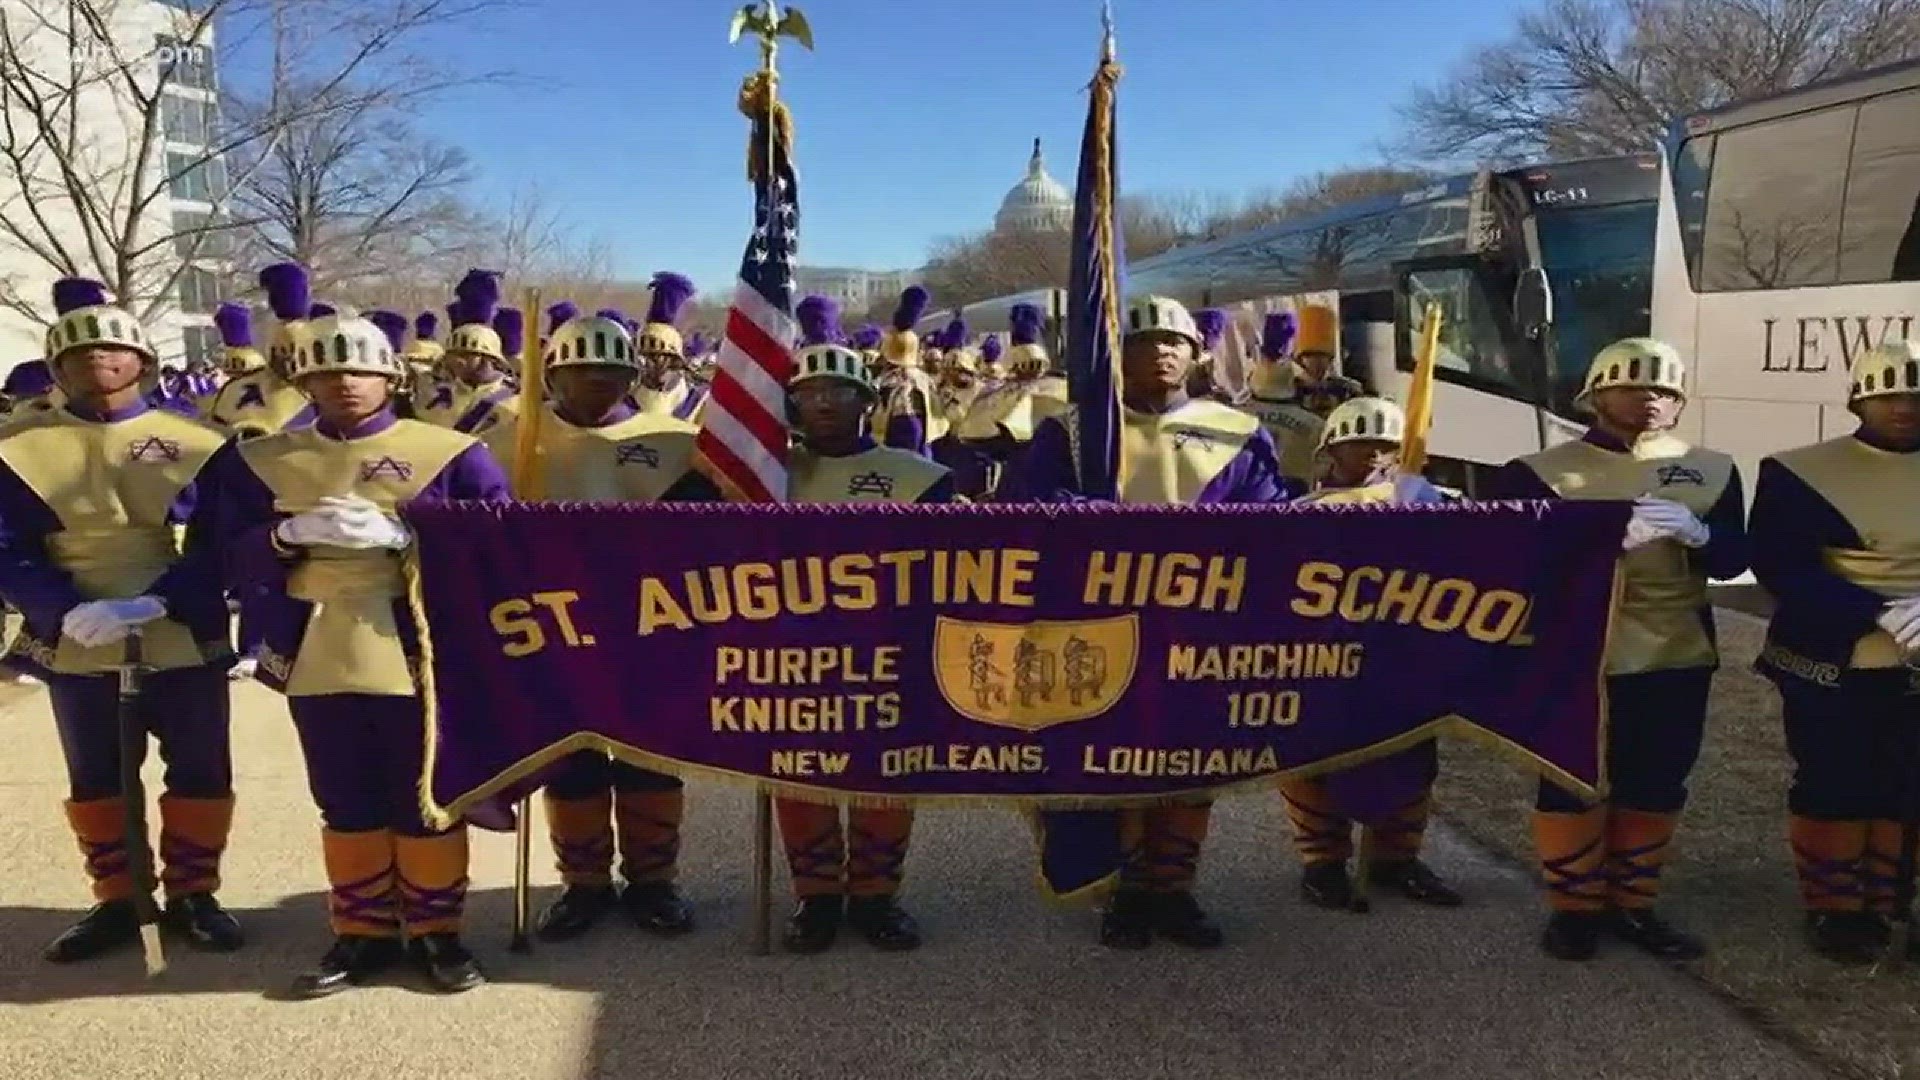 The St. Augustine's marching band embarked on an historic trip.